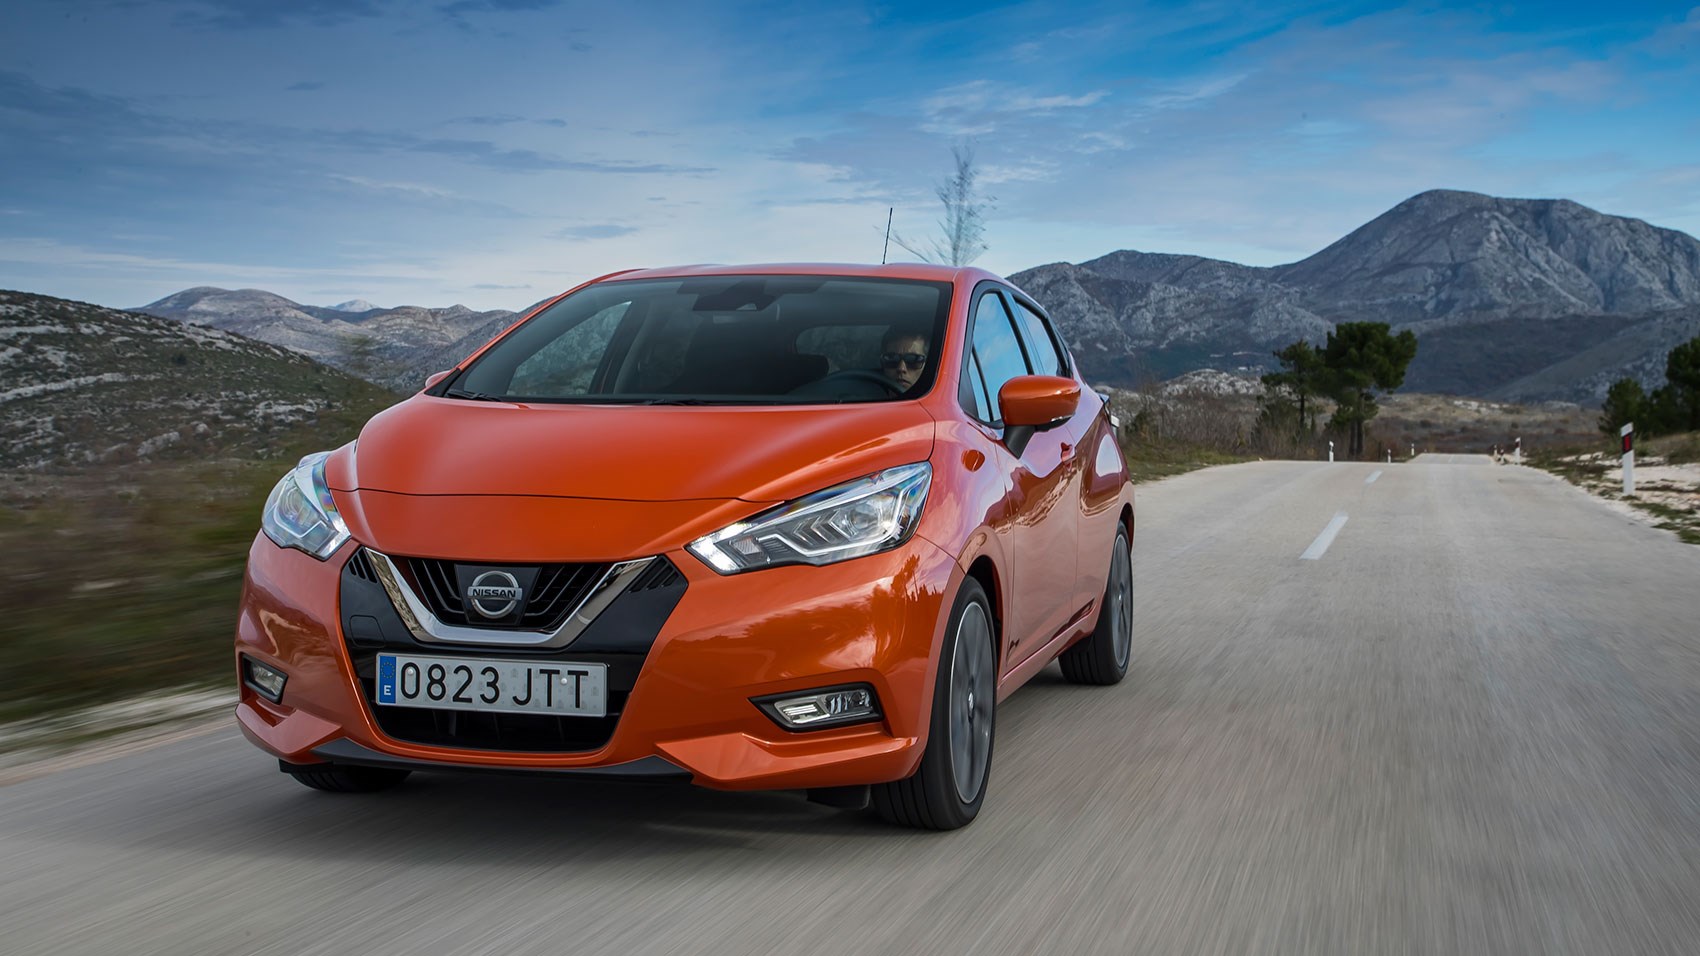 New Nissan Micra (2013-2017) Review, Drive, Specs & Pricing